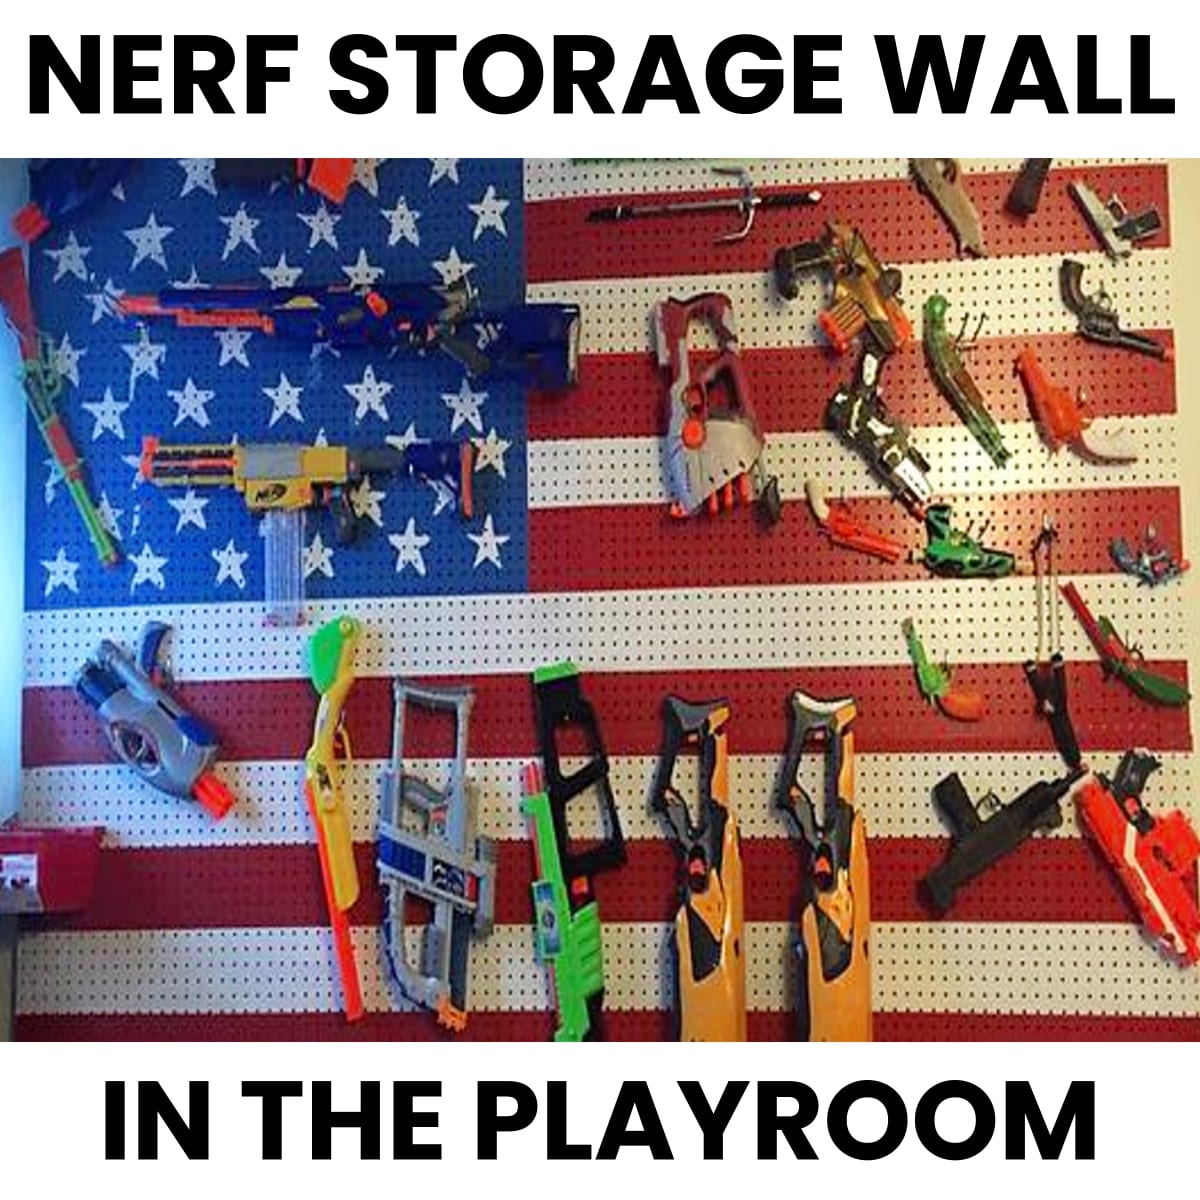 NERF storage wall in the playroom